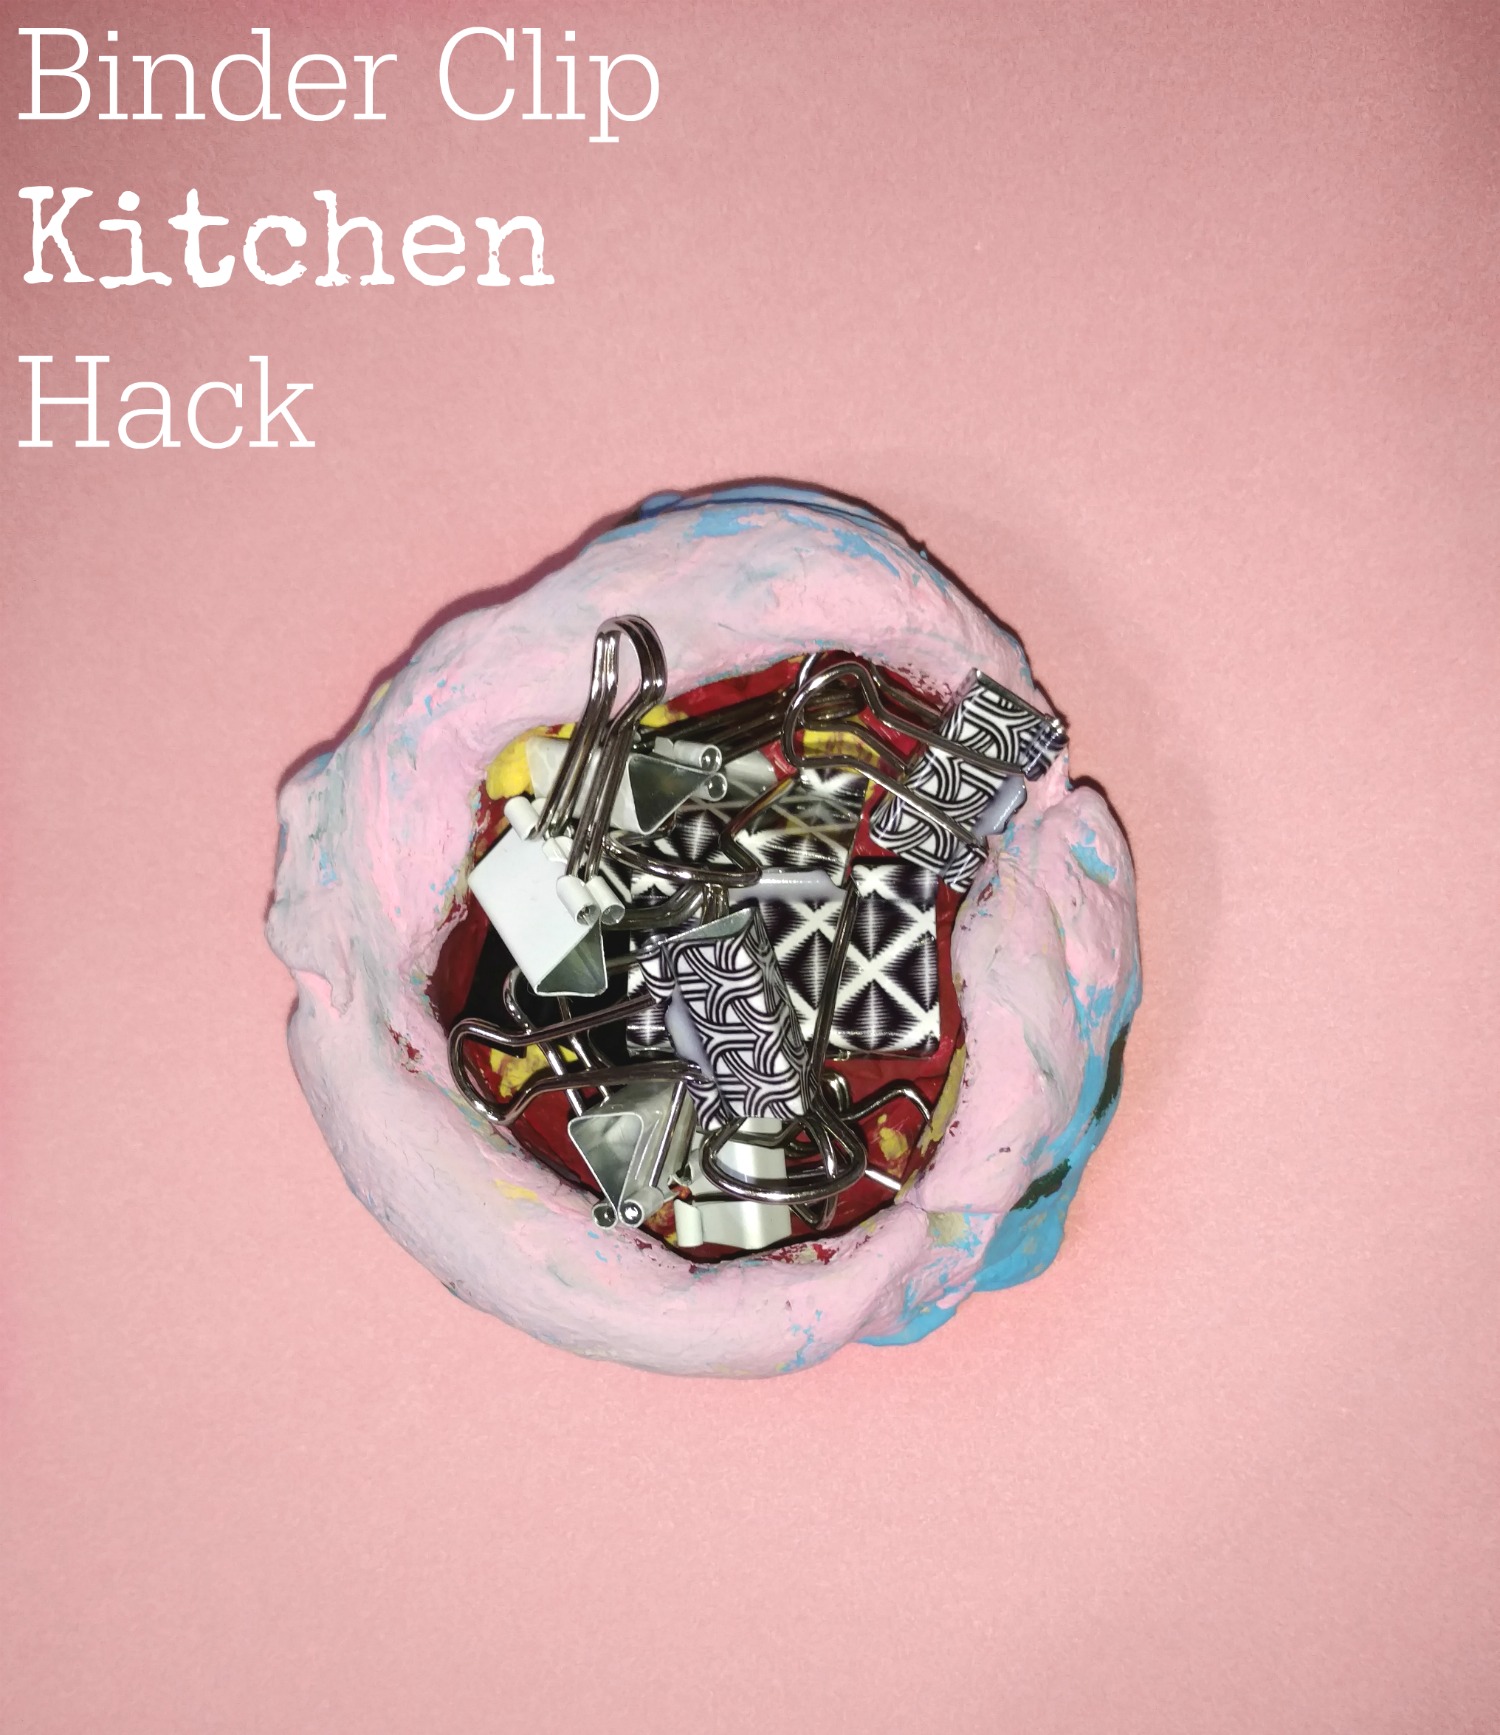 In this kitchen hack, you can use binder clips in an unexpected way!